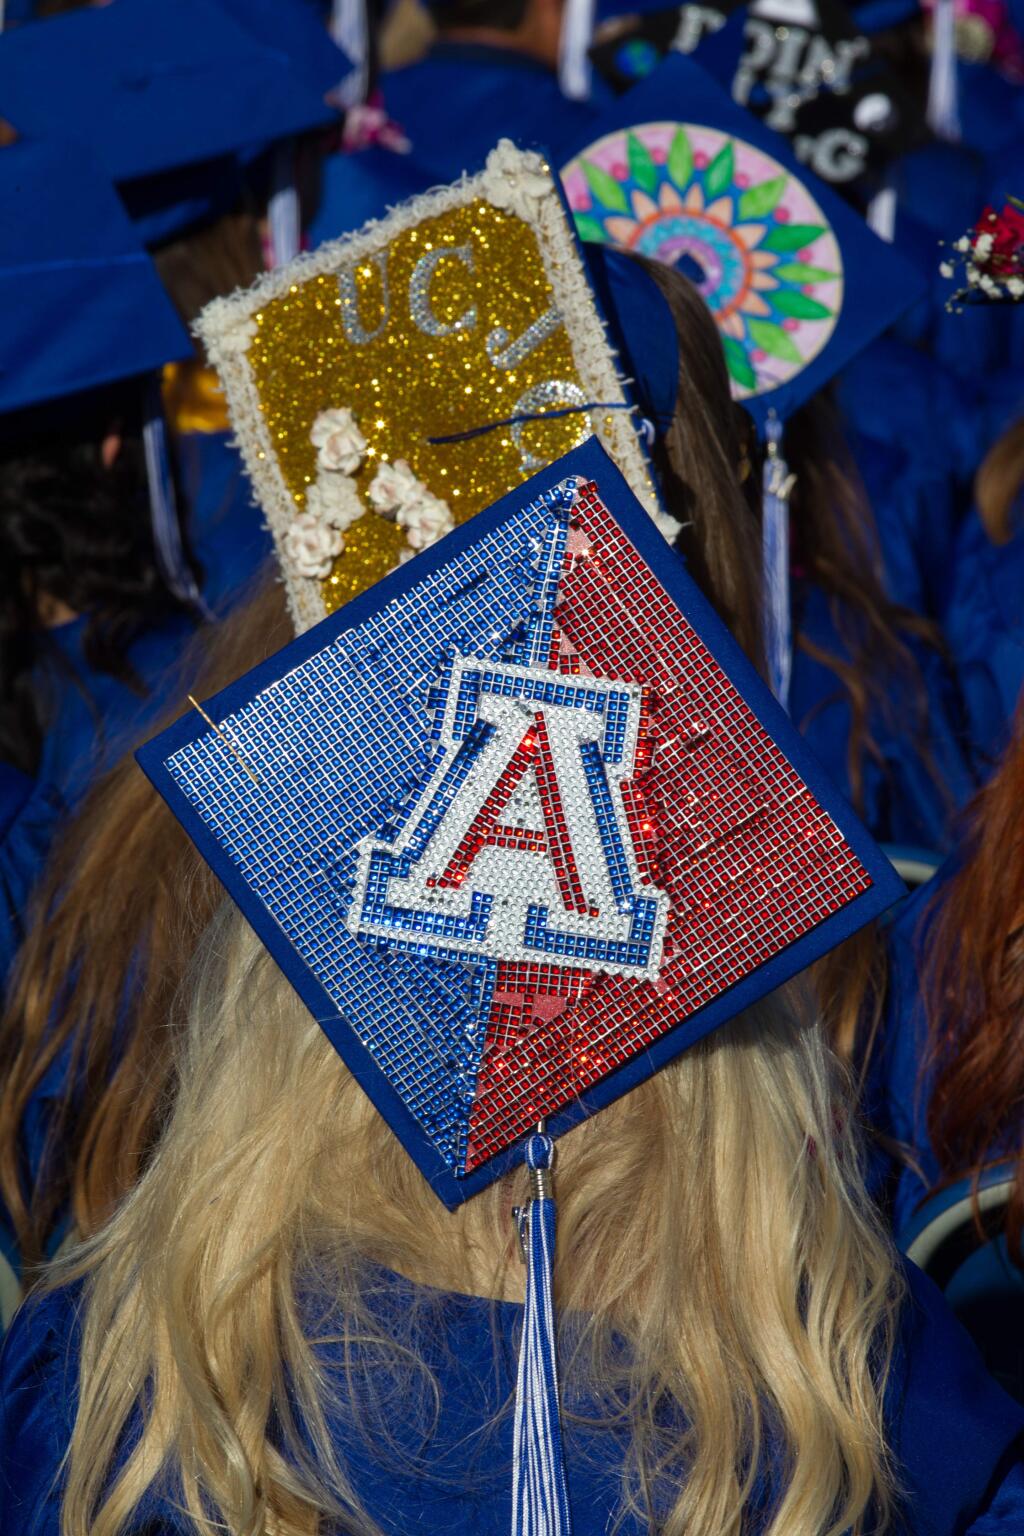 Colorful caps worn at the class of 2017 commencement ceremony for Analy High School in Sebastopol, Calif., on Friday, June 2, 2017. (Photo by Darryl Bush / For The Press Democrat)